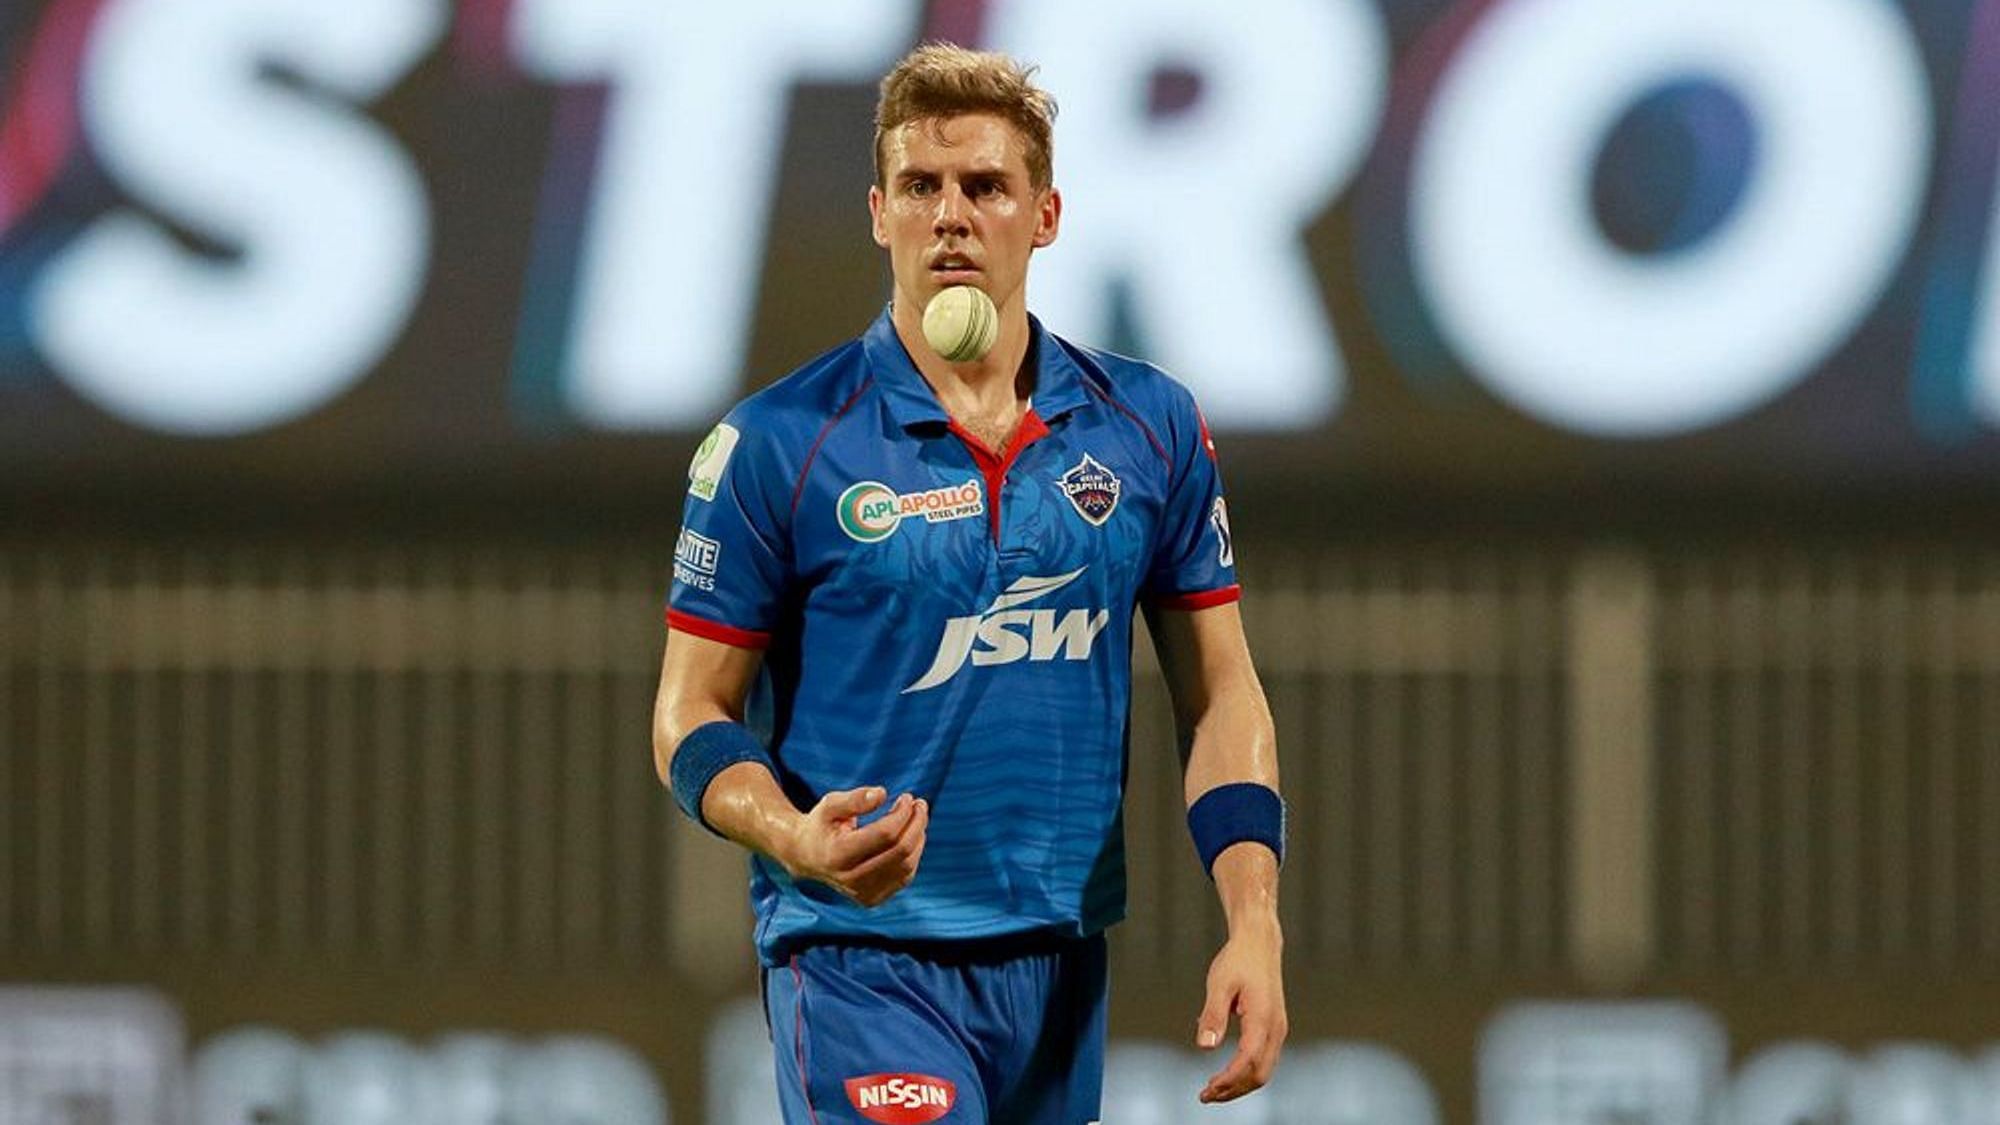 Delhi Capitals pacer Anrich Nortje who has been in terrific form, said that it will be a good challenge against RCB and DC have the team to up for it